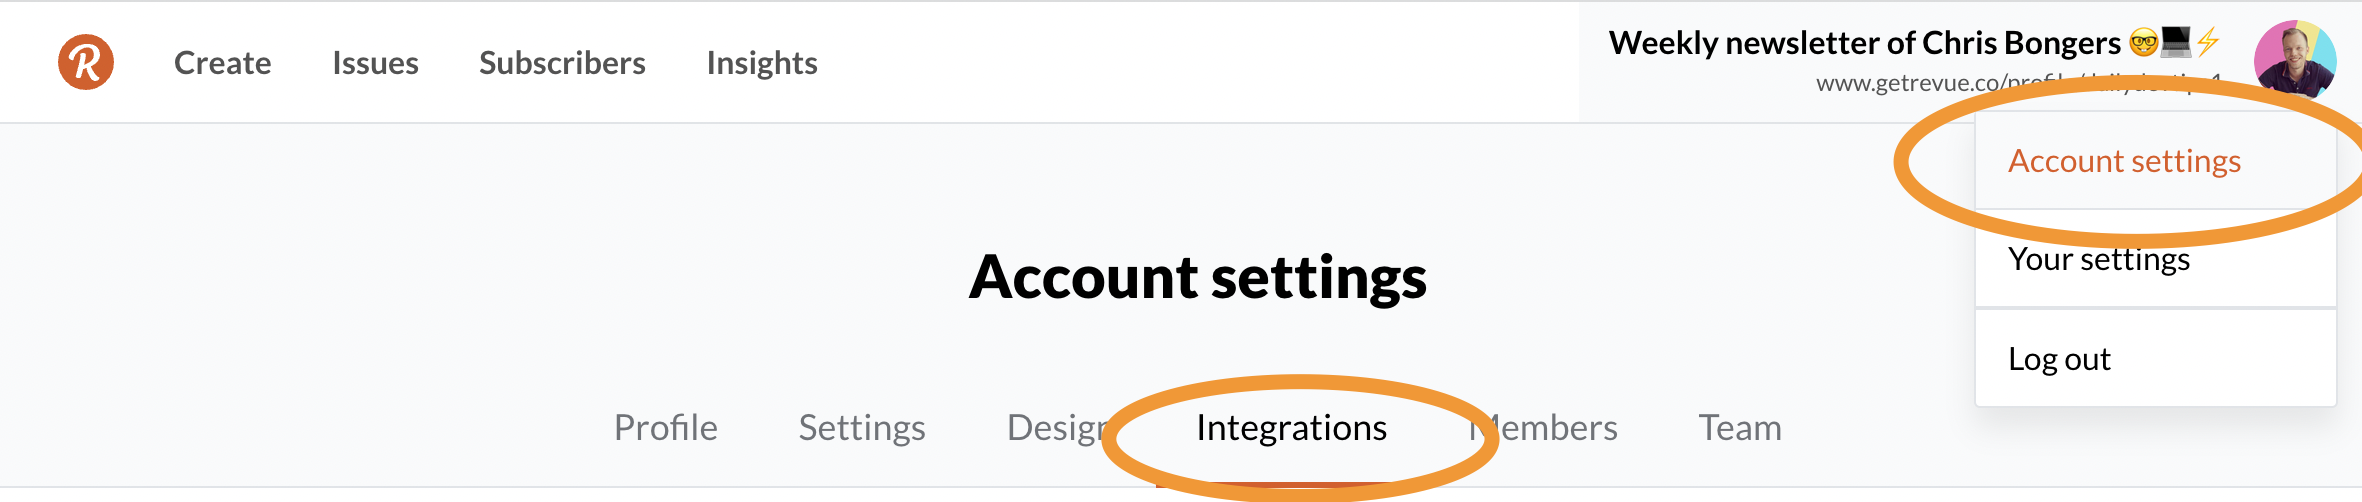 Revue integrations page